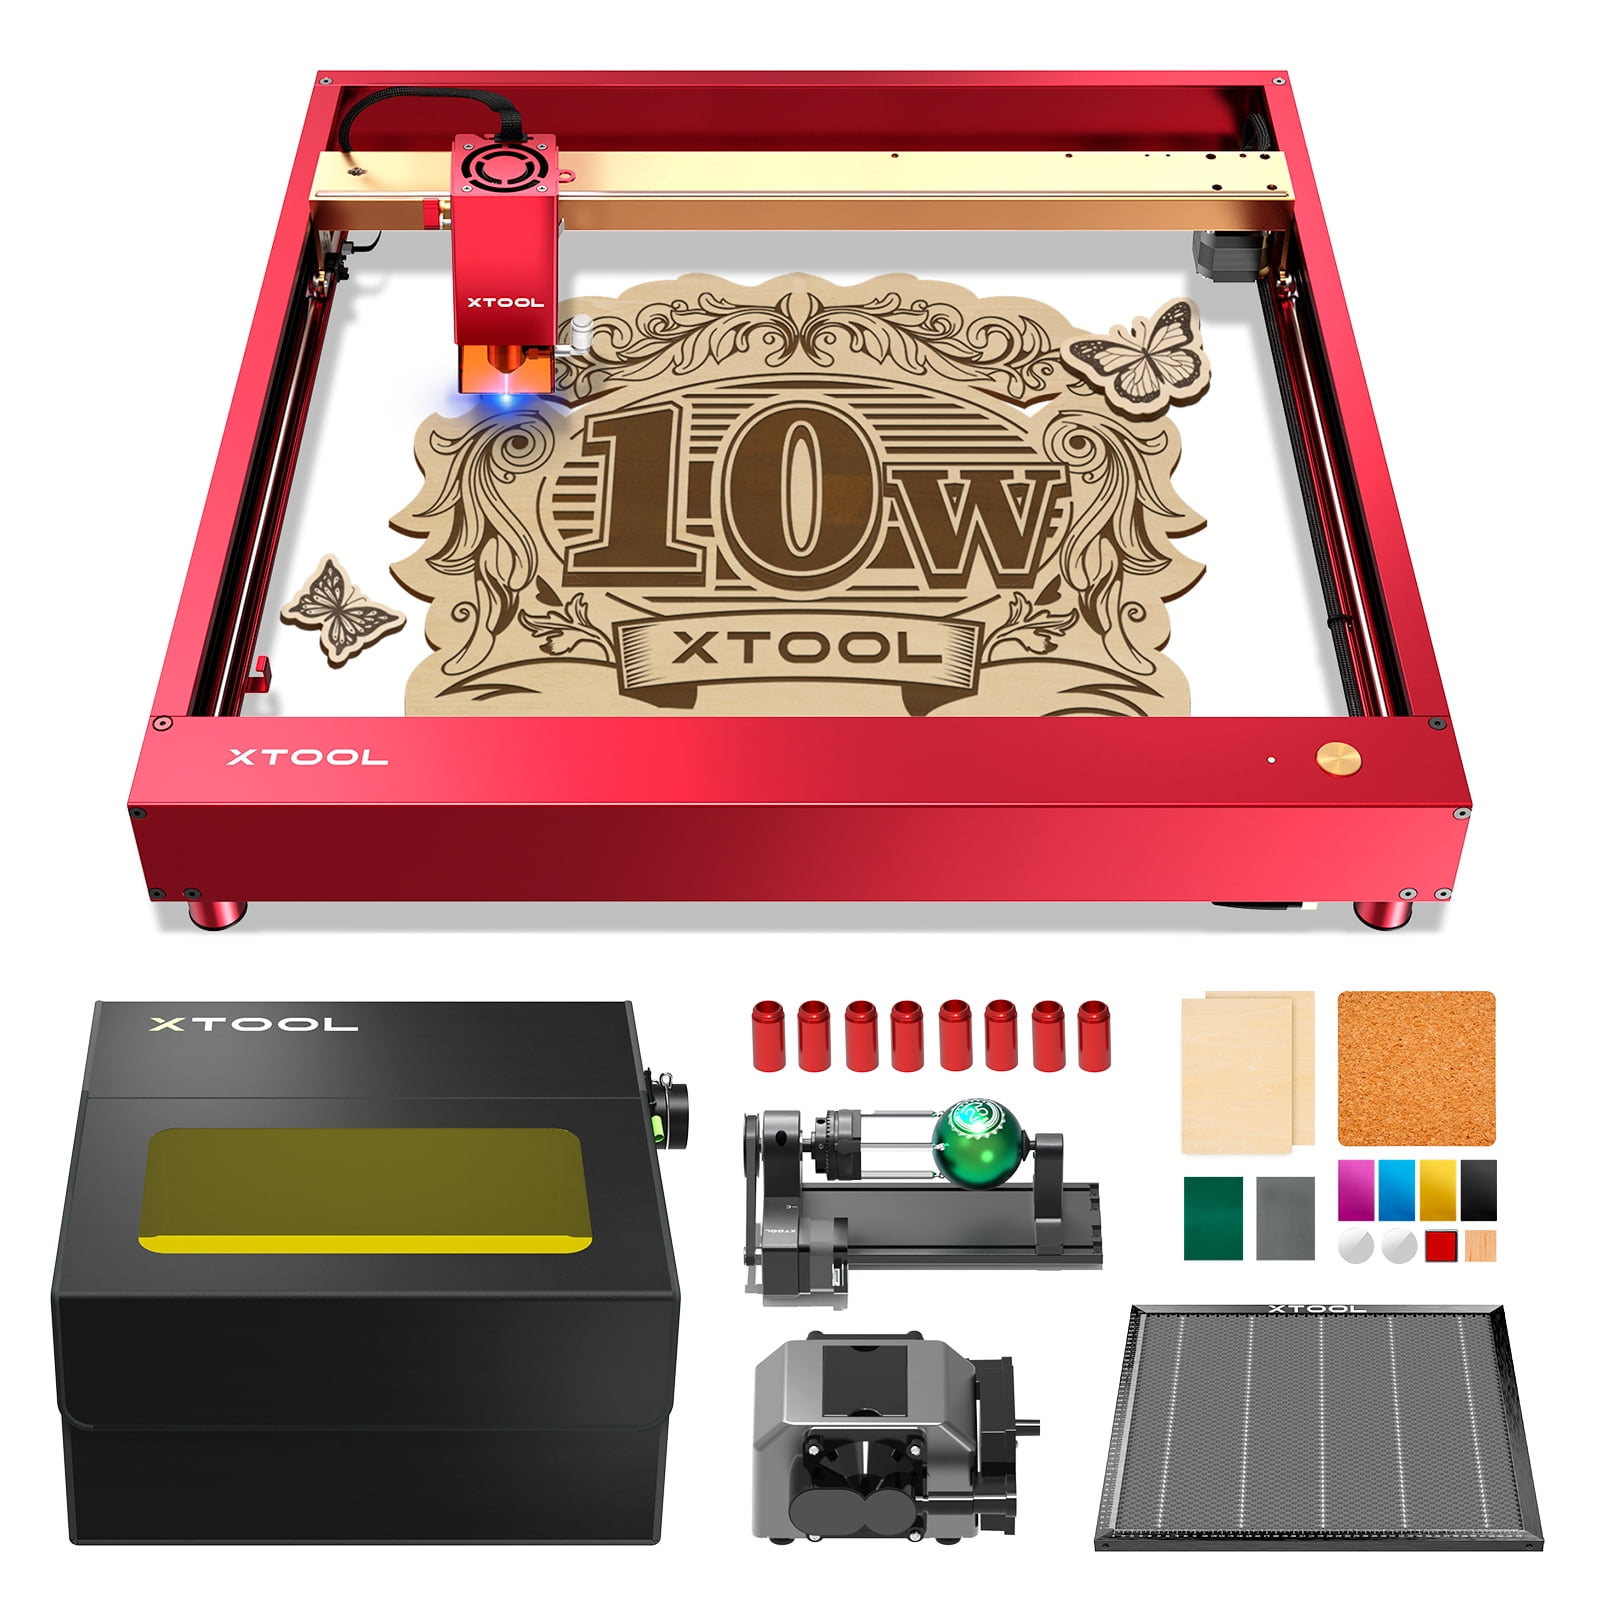 xTool M1 2-in-1 Laser Engraver, 10w Output Craft Laser Cutter with  Integrated Enclosure, Compatibility with Rotary, Air Assist, Honeycomb  Panel, Laser